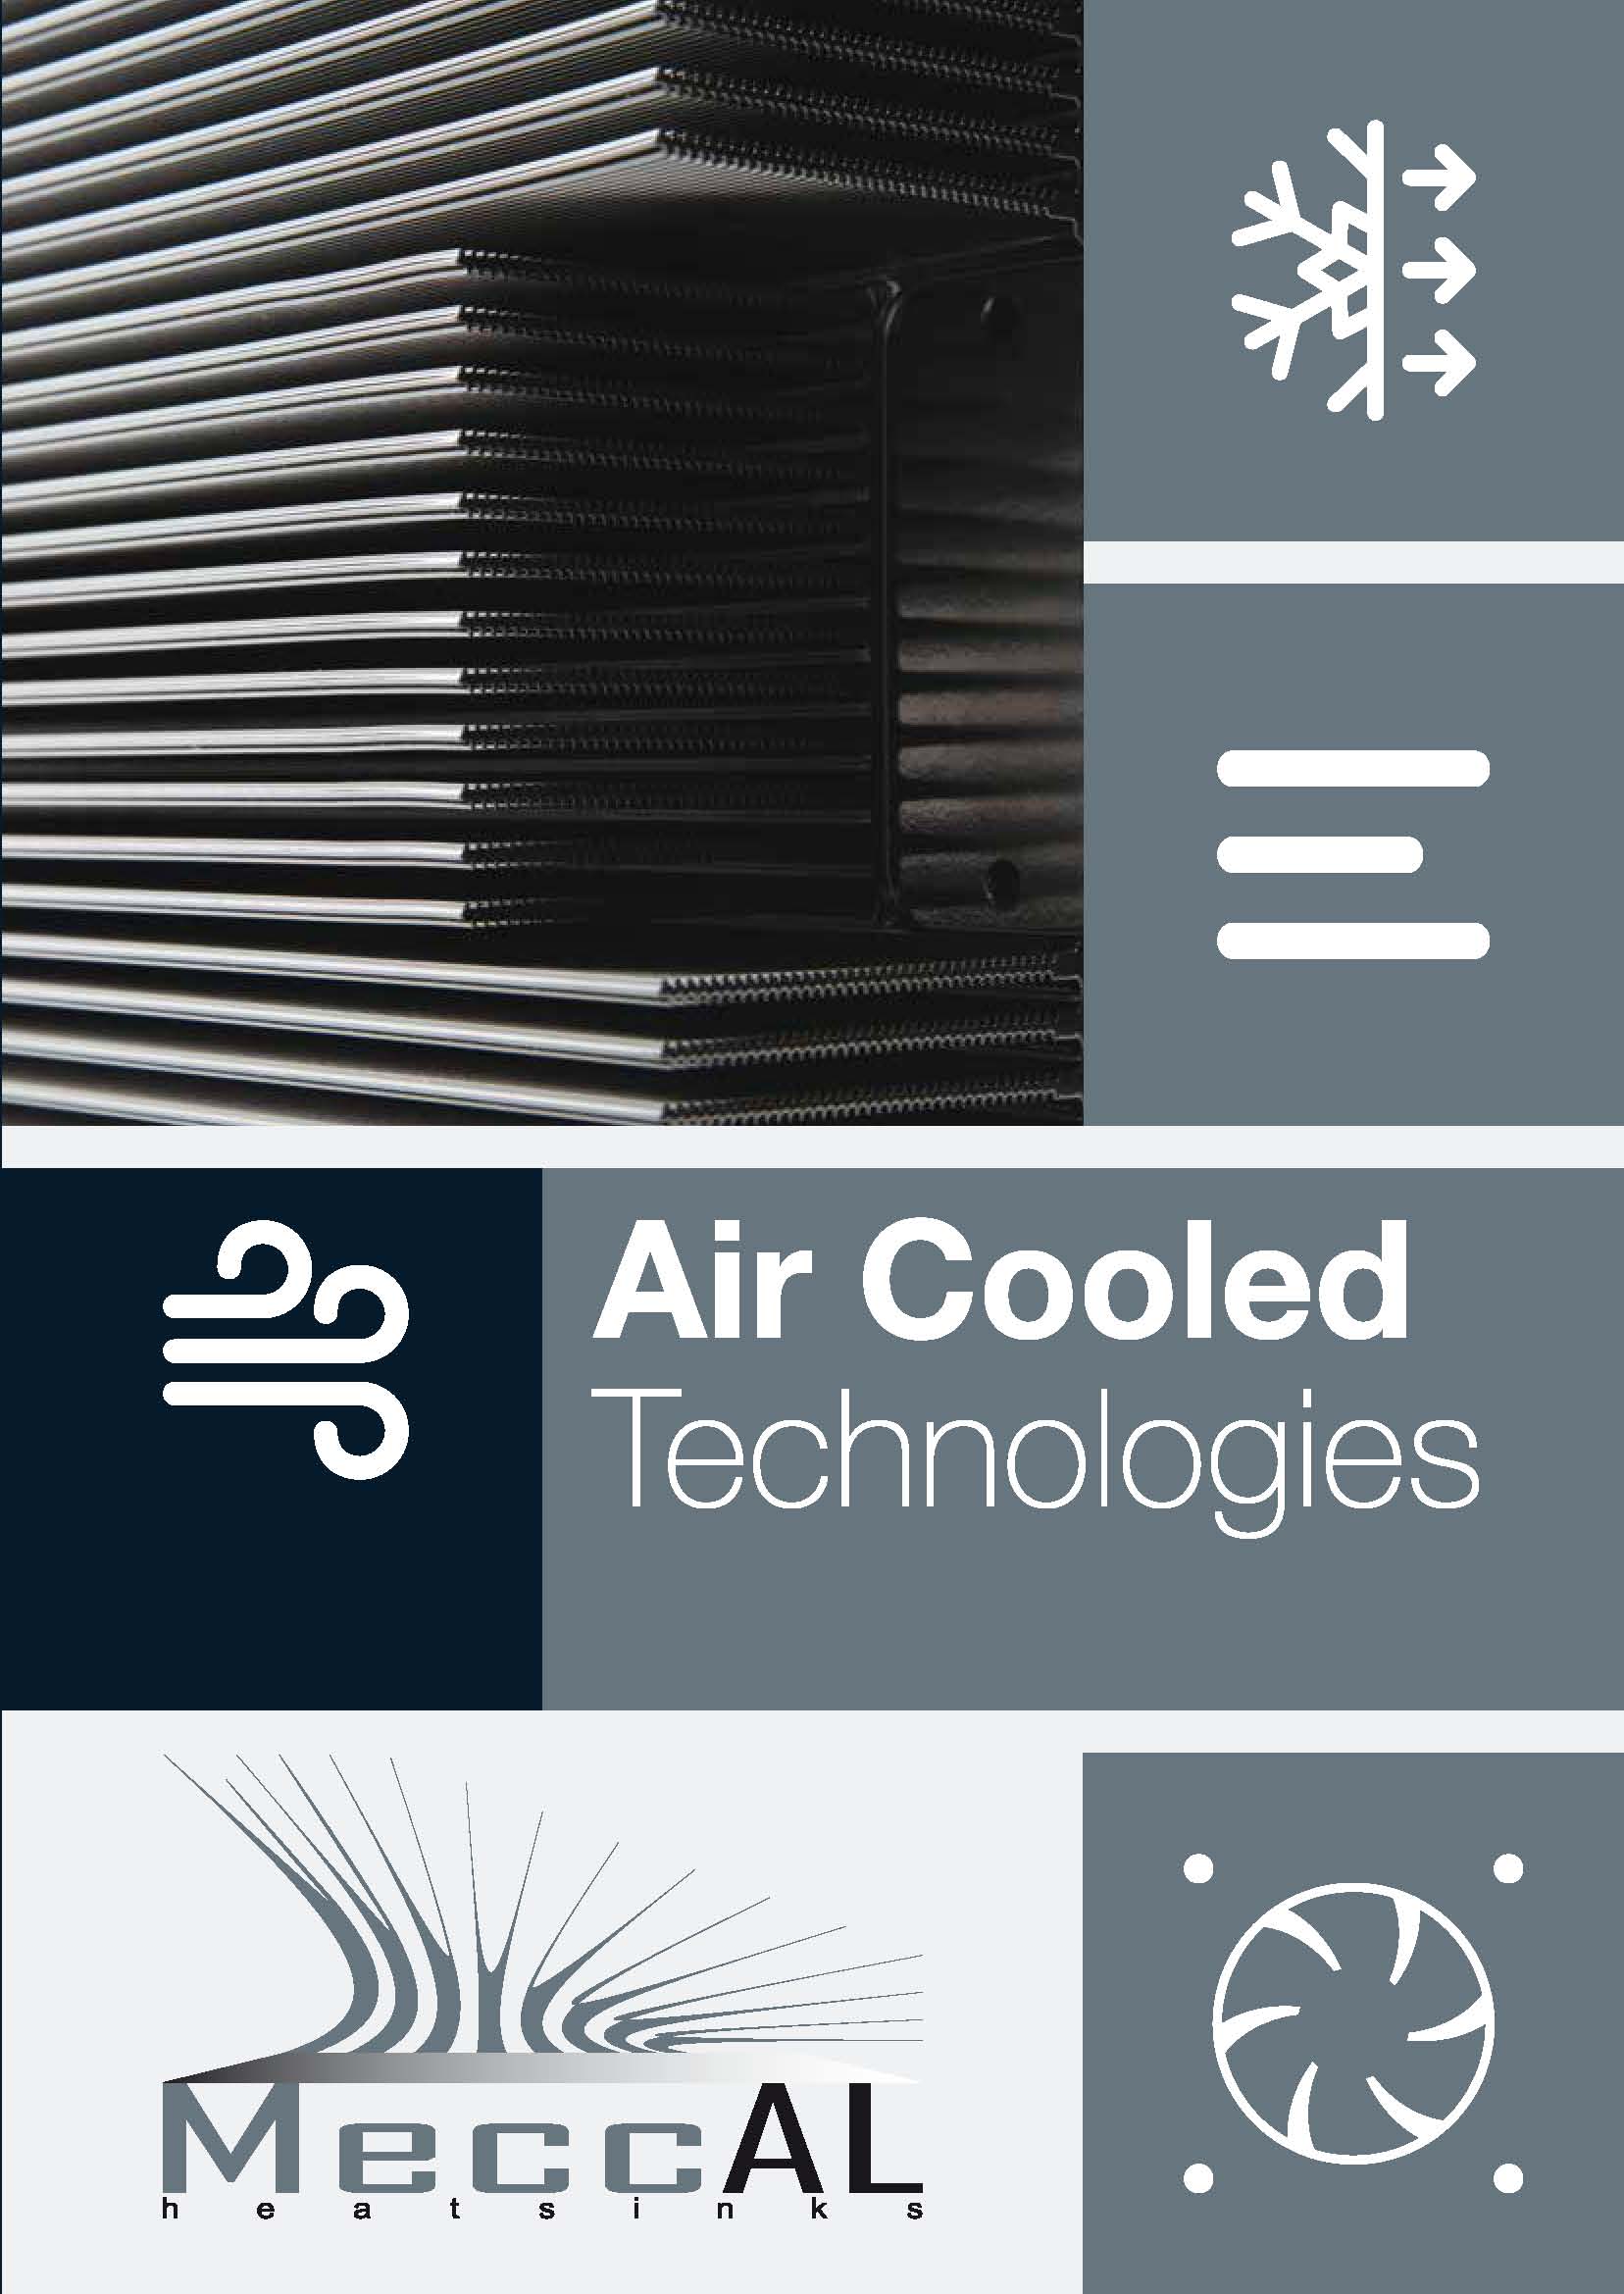 MeccAl - Air Cooled Technologies